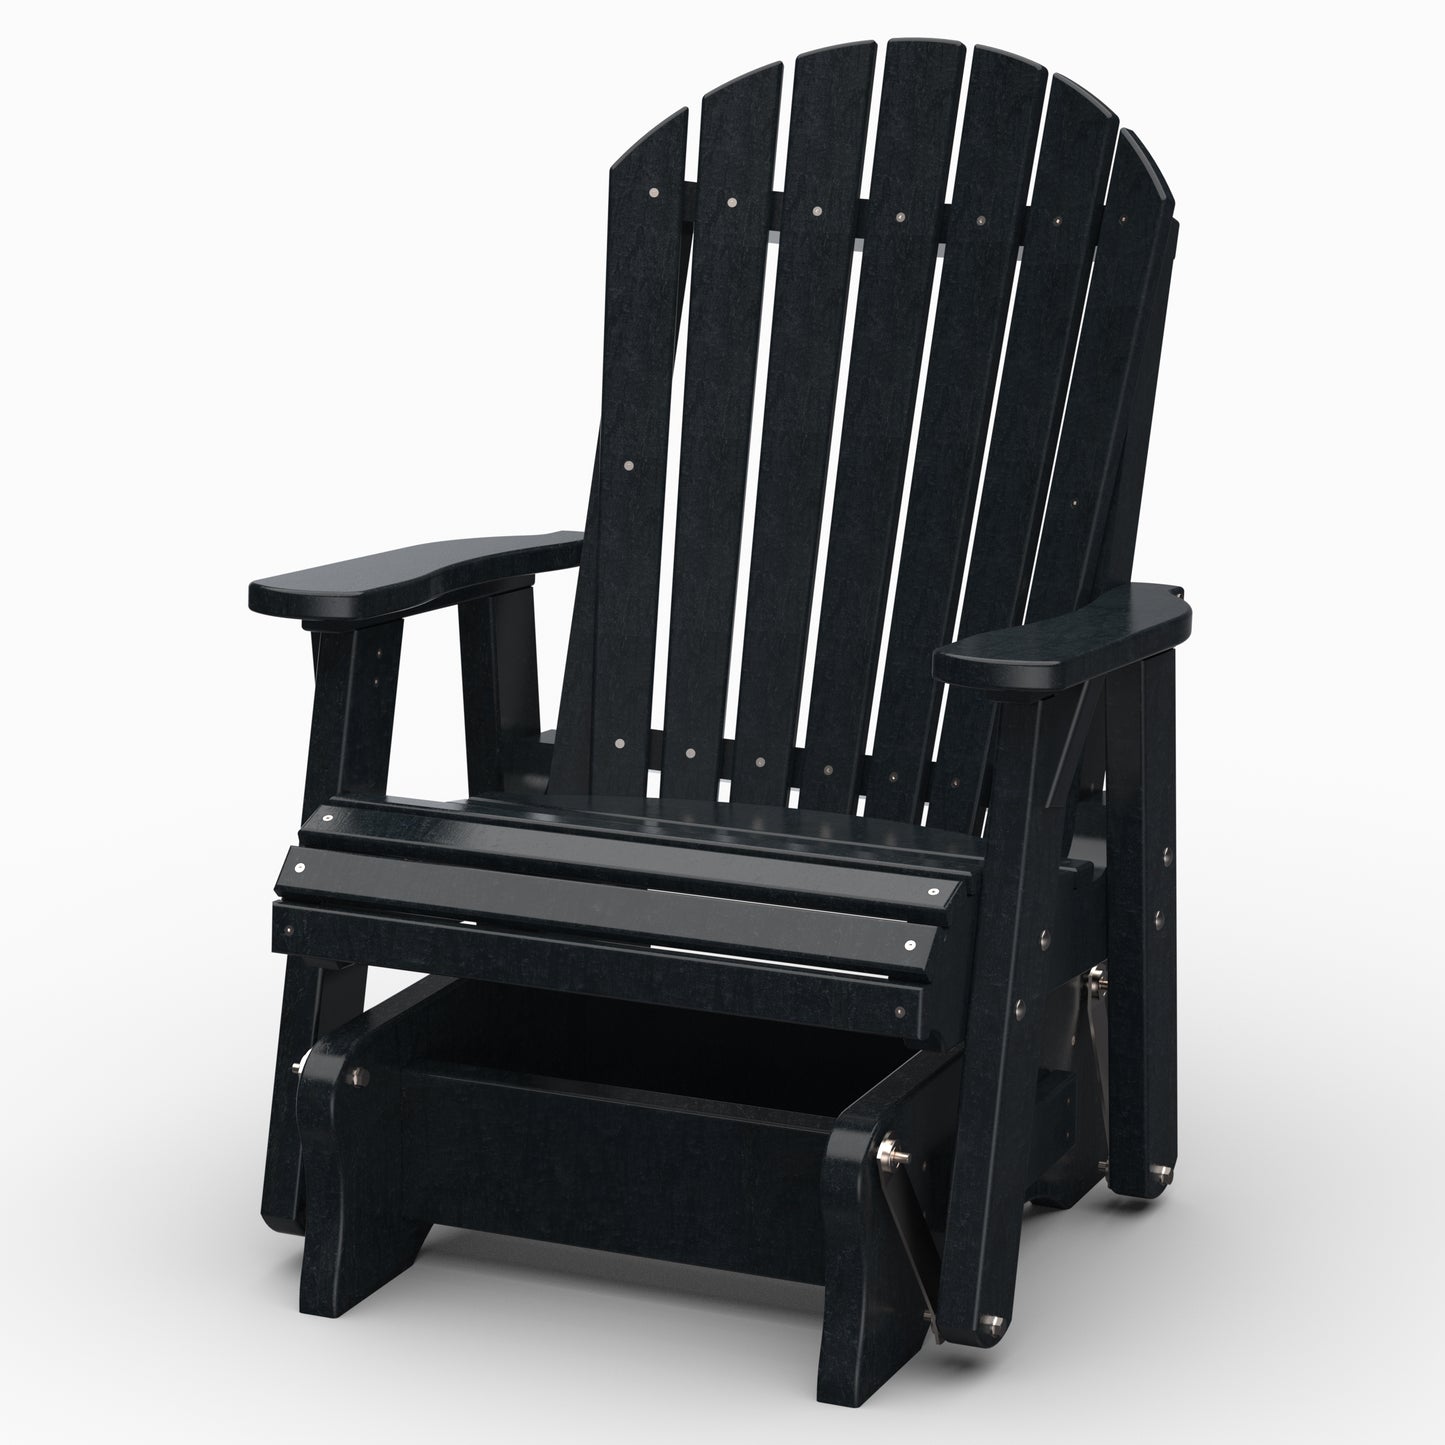 Wildridge Outdoor Recycled Plastic Heritage 2' Adirondack Glider (QUICK SHIP) - LEAD TIME TO SHIP 3 TO 4 BUSINESS DAYS